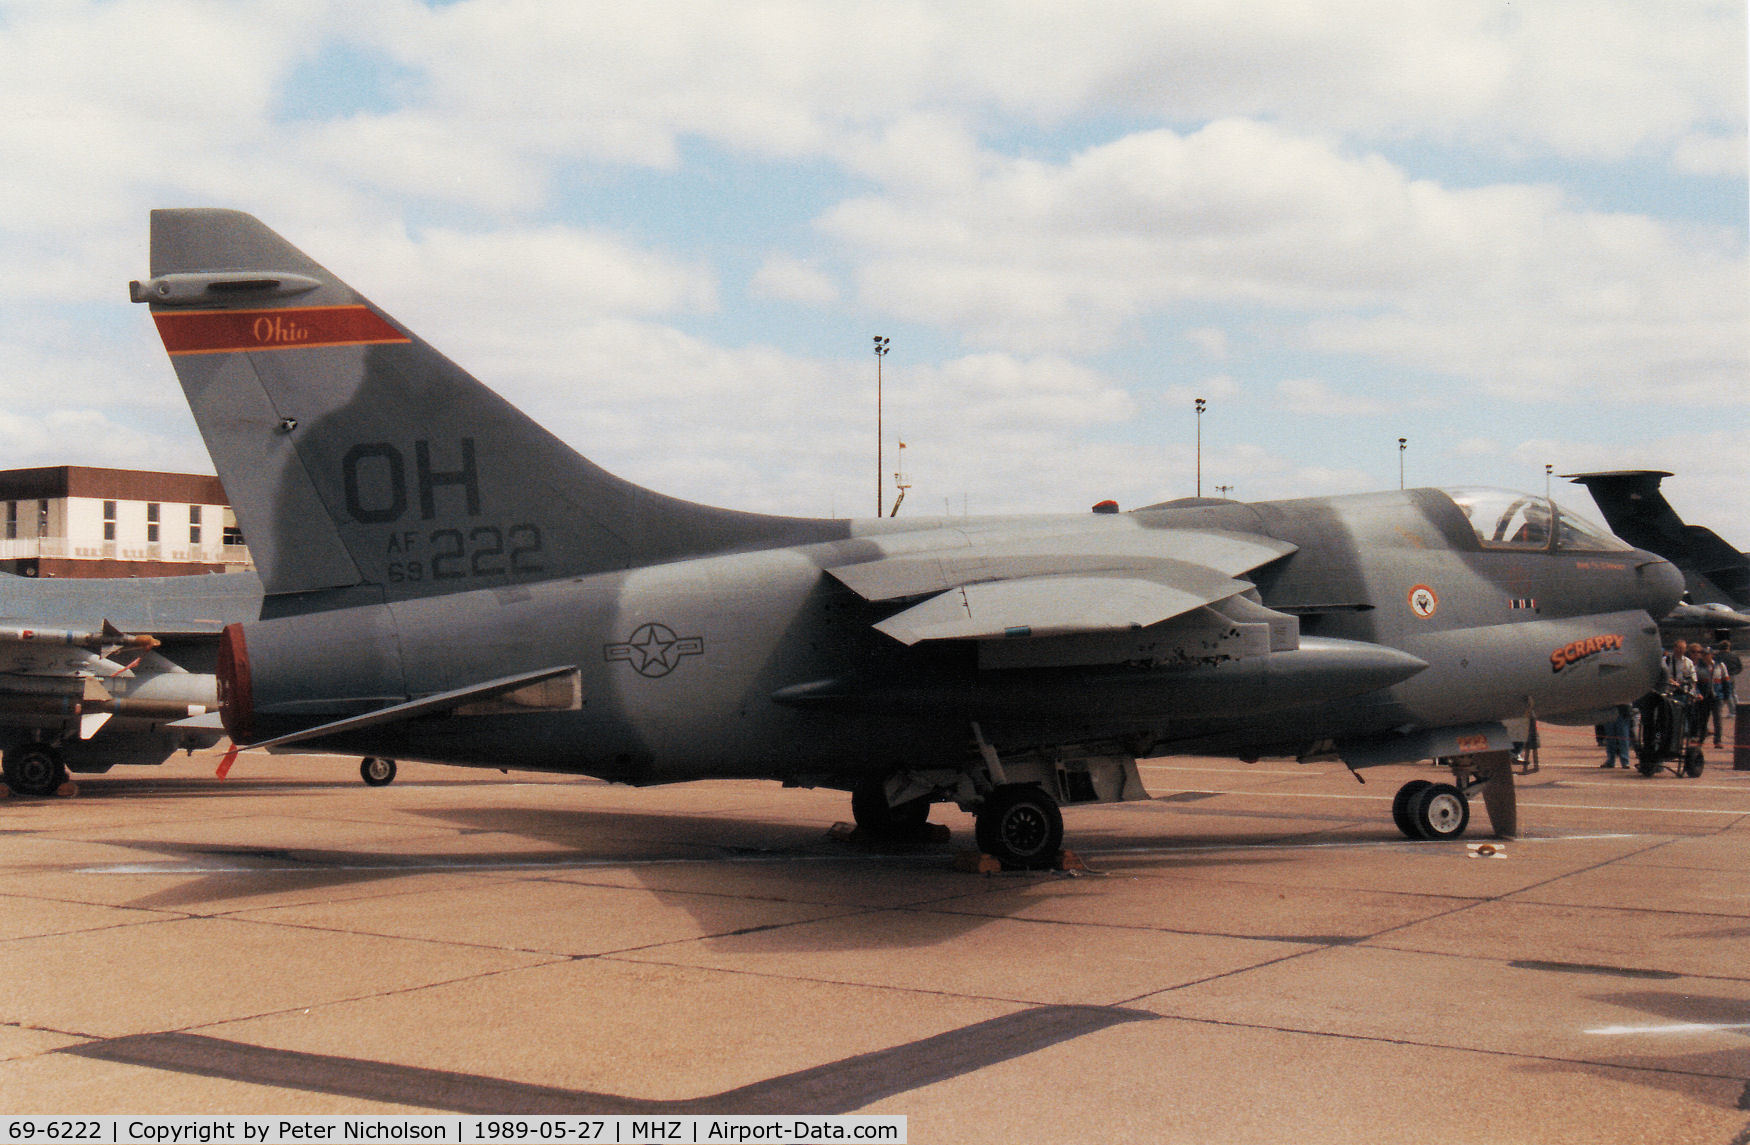 69-6222, 1969 LTV A-7D Corsair II C/N D-052, A-7D Corsair named Scrappy of 162nd Tactical Fighter Squadron of Ohio ANG on display at the 1989 RAF Mildenhall Air Fete.